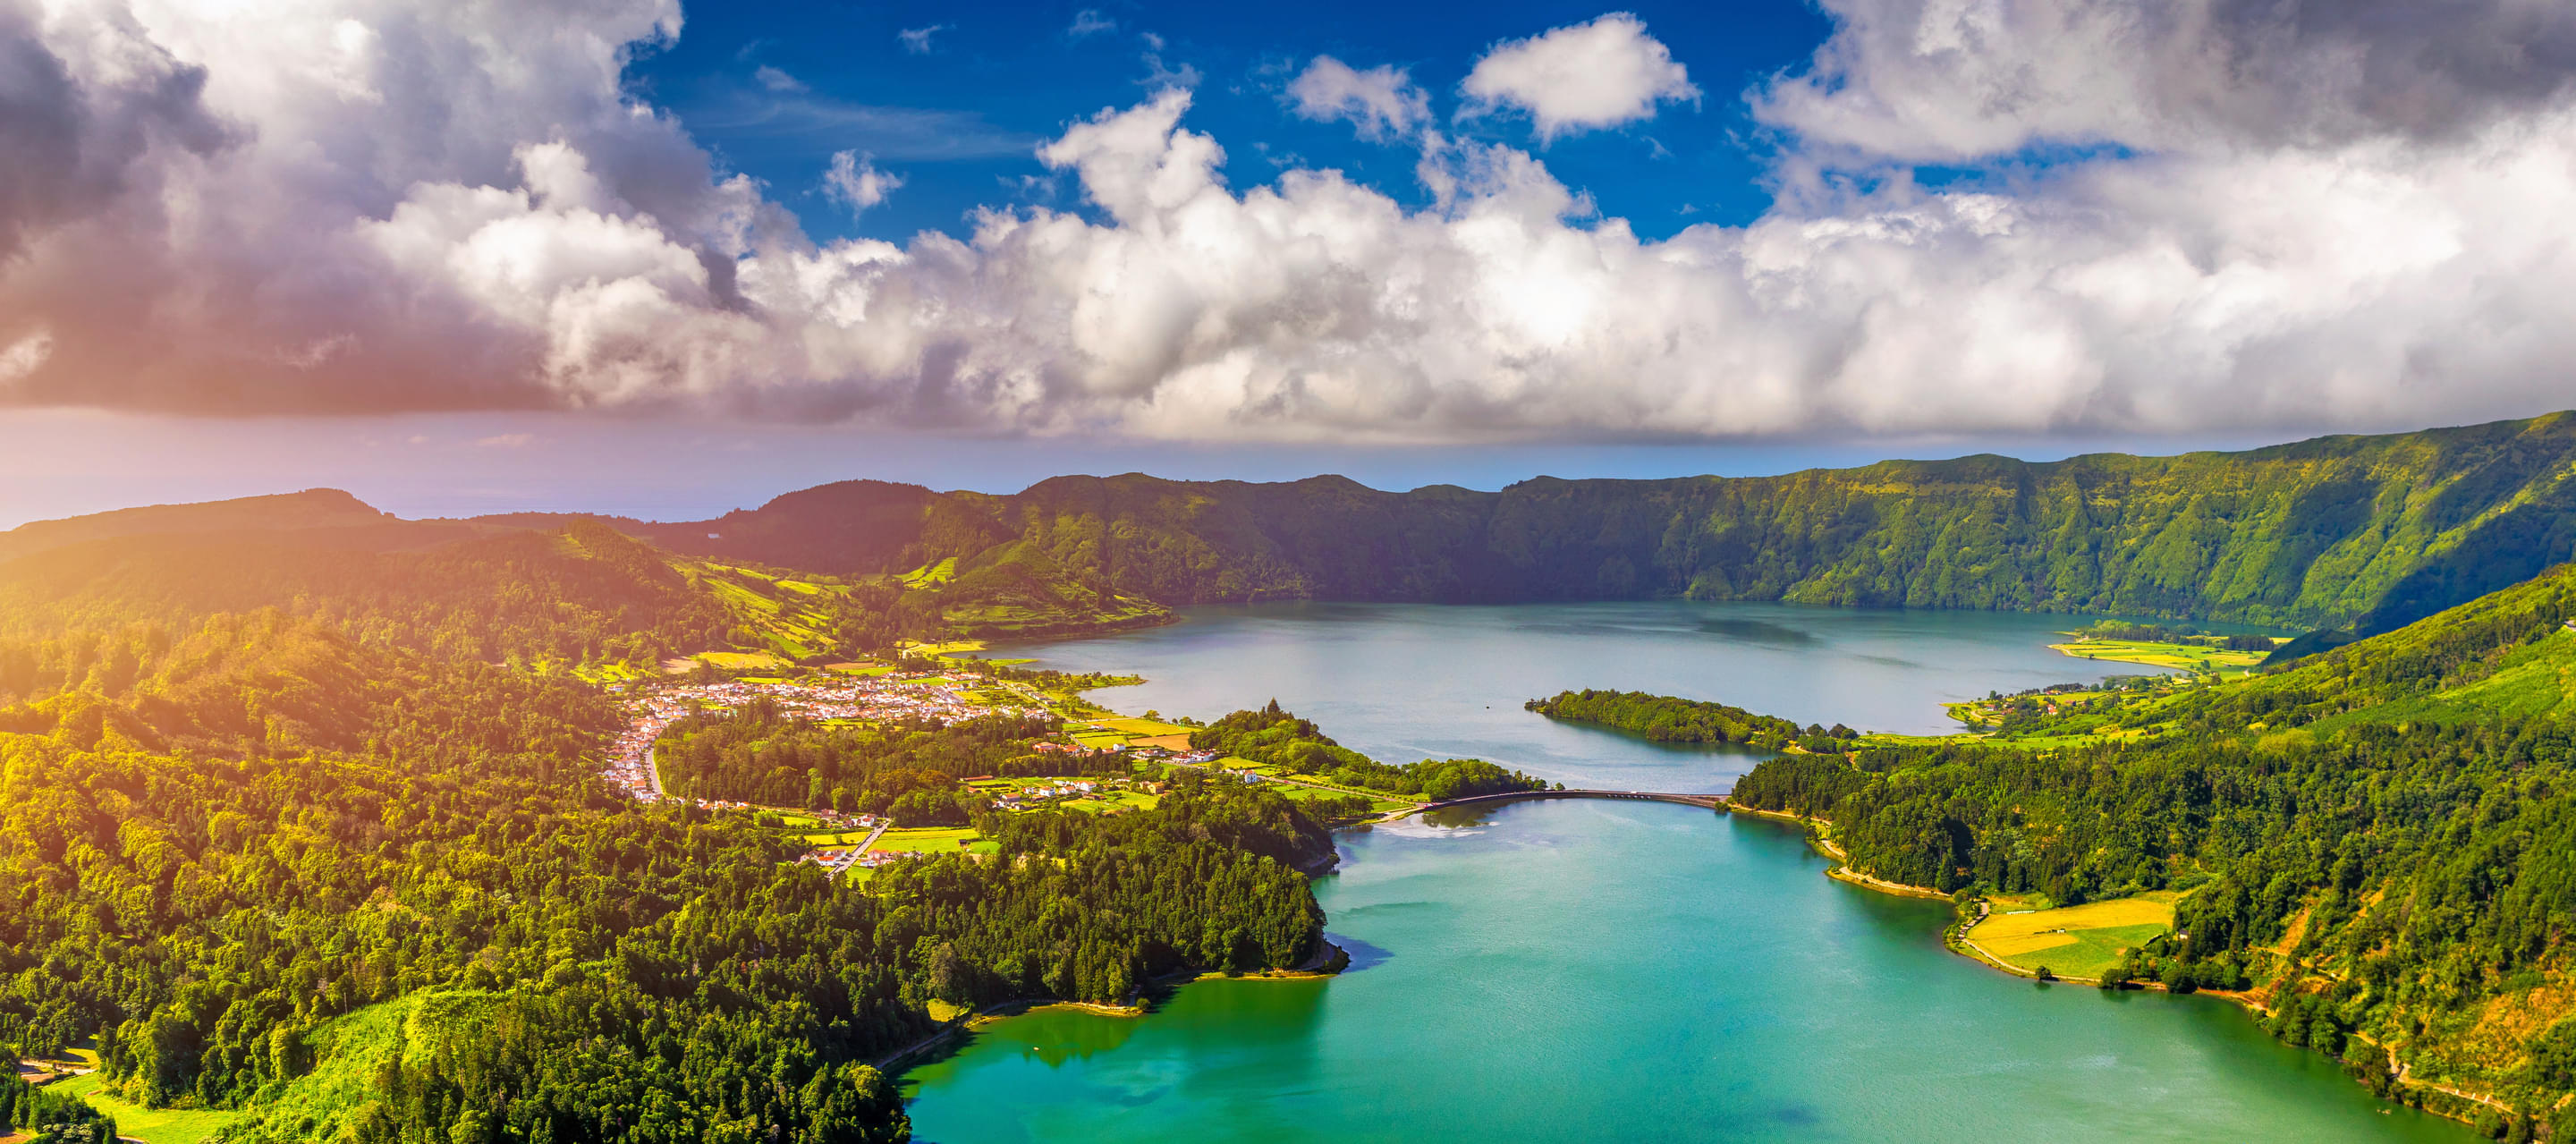 The Azores Overview